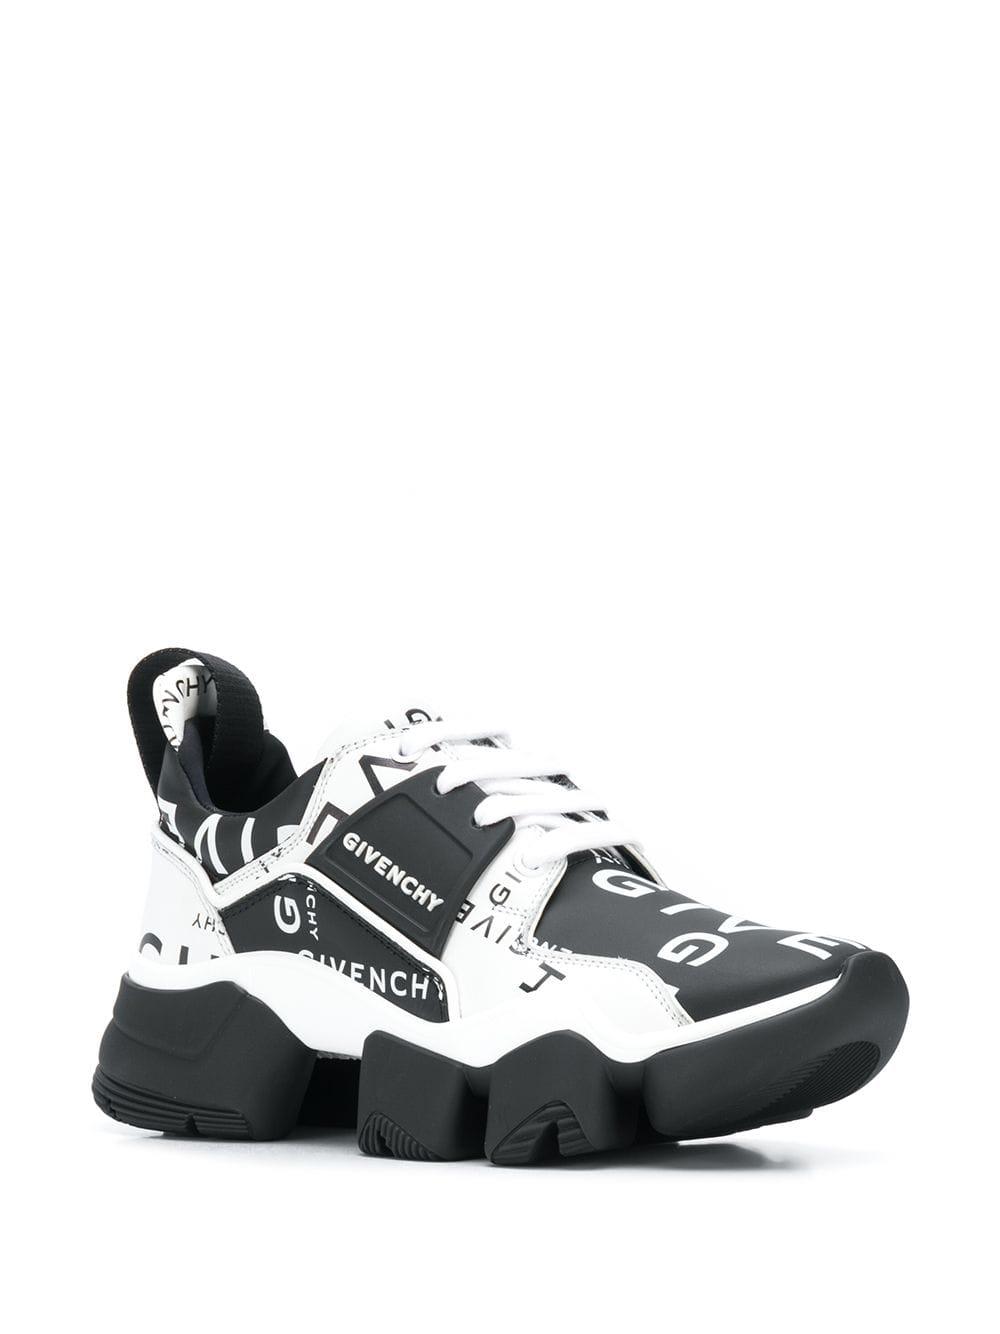 Givenchy Jaw Logo Chunky Sneakers in White | Lyst